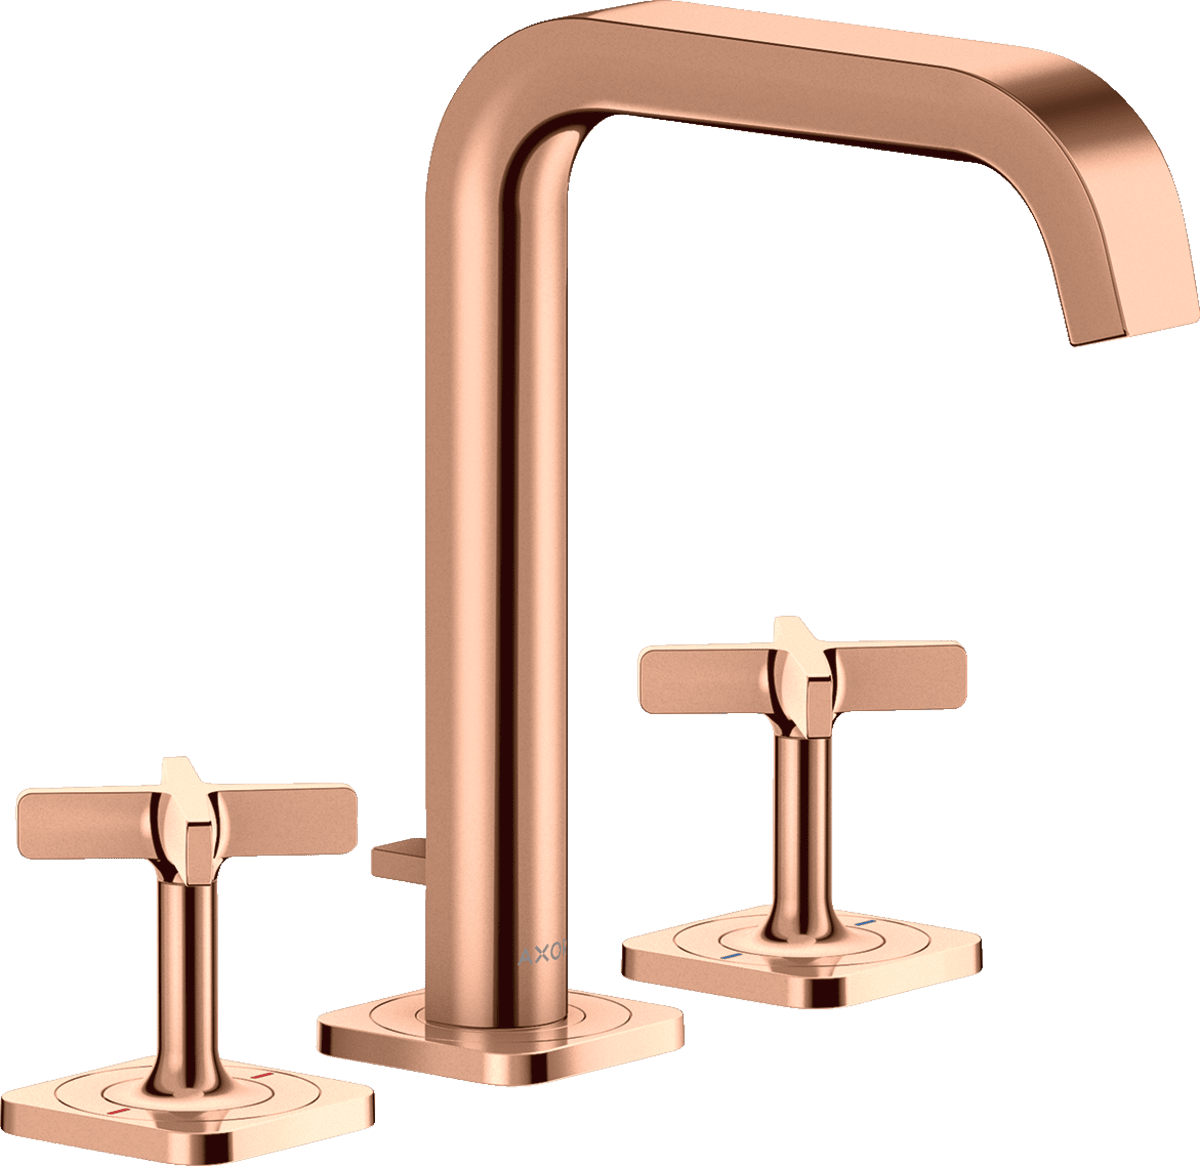 Picture of HANSGROHE AXOR Citterio E 3-hole basin mixer 170 with escutcheons and pop-up waste set #36108300 - Polished Red Gold